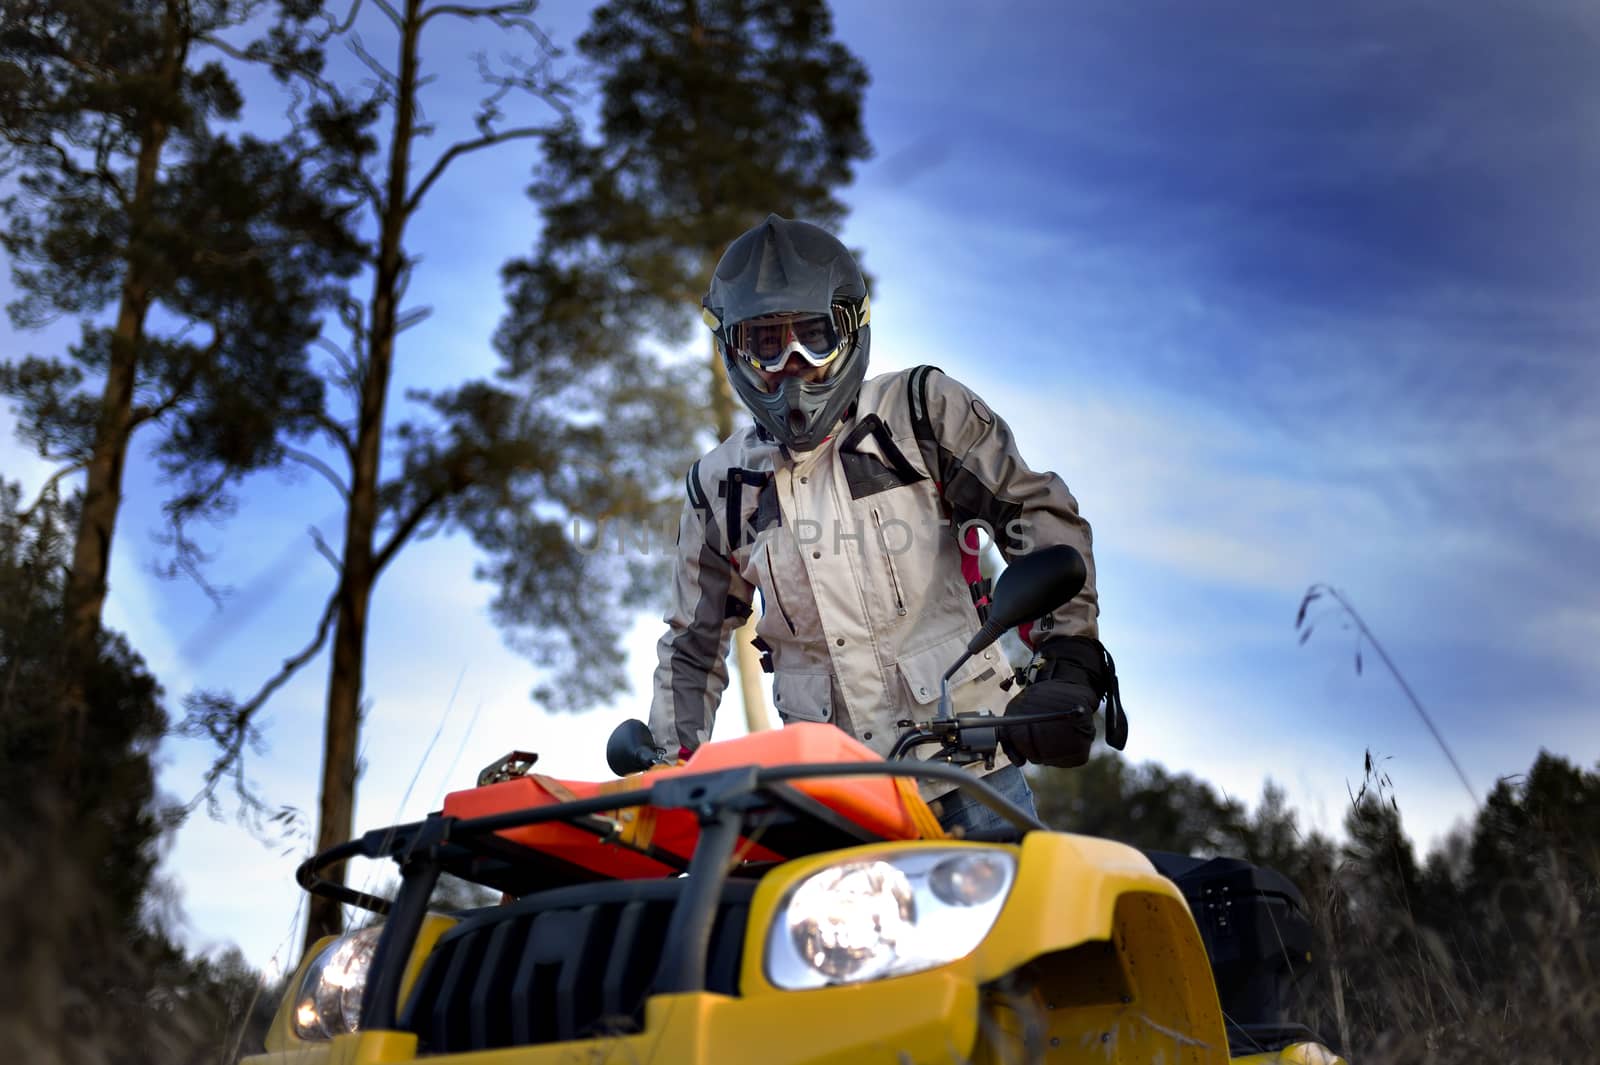 Horizontal close-up of a man in helmet and safety goggles looking into the camera while sitting on quad bike against vivid blue sky.